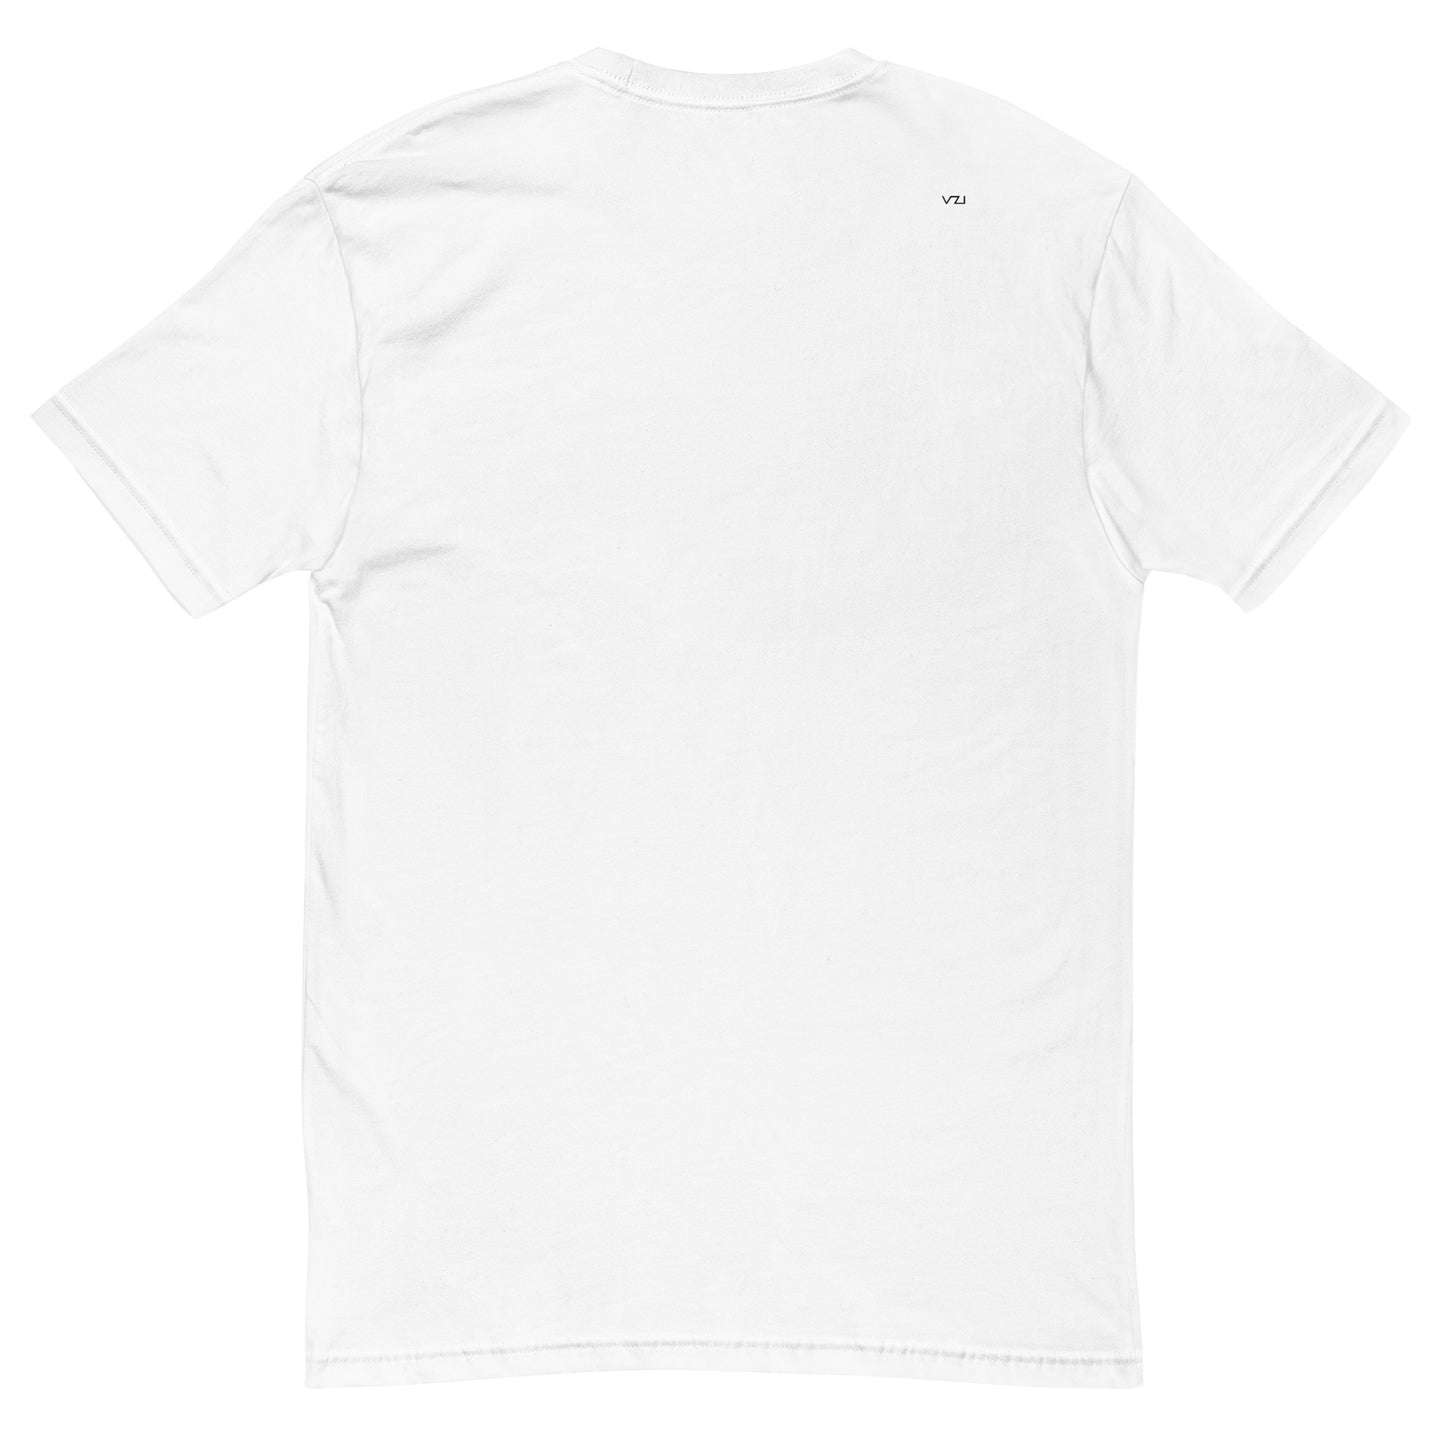 Vazzari Couture : Men's Fitted T-Shirt - Inked, Smart Casual, Club